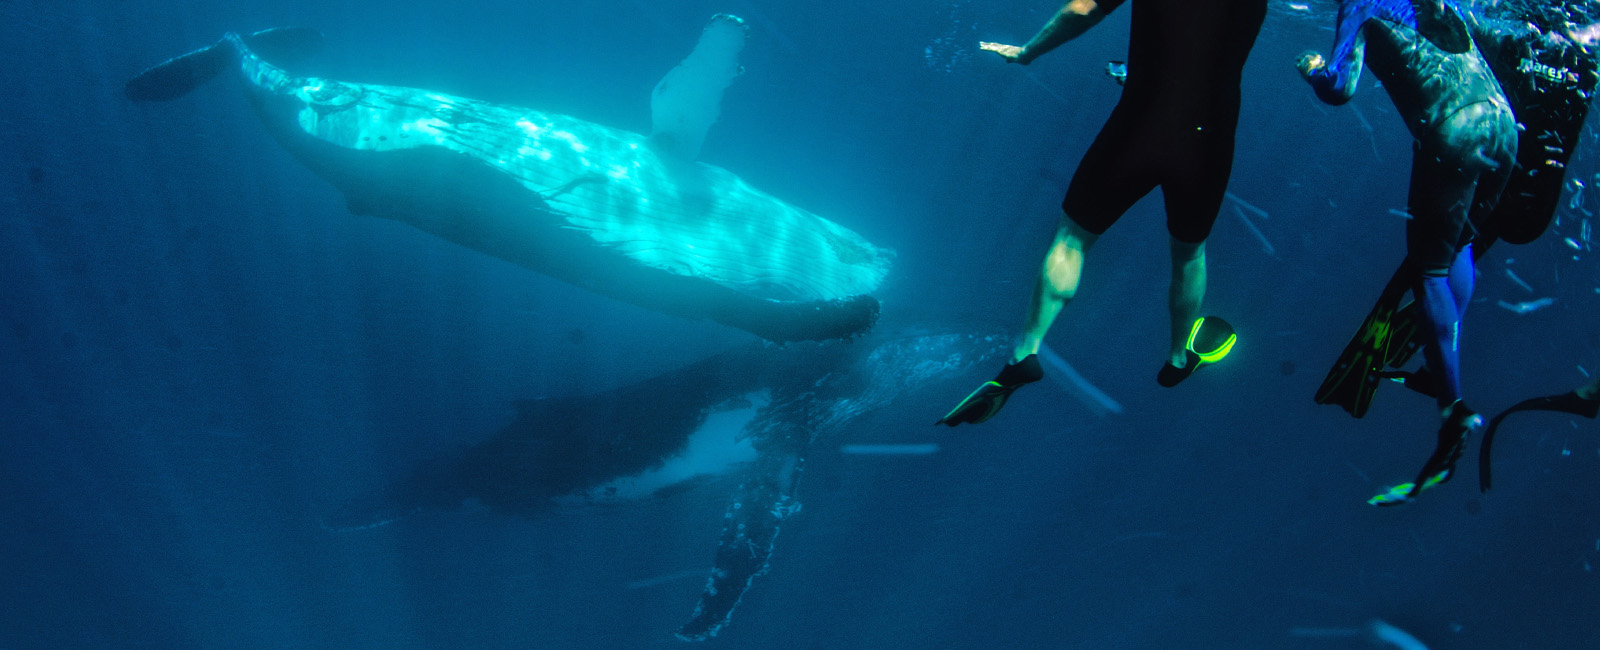 Two humpback whales near some scuba divers